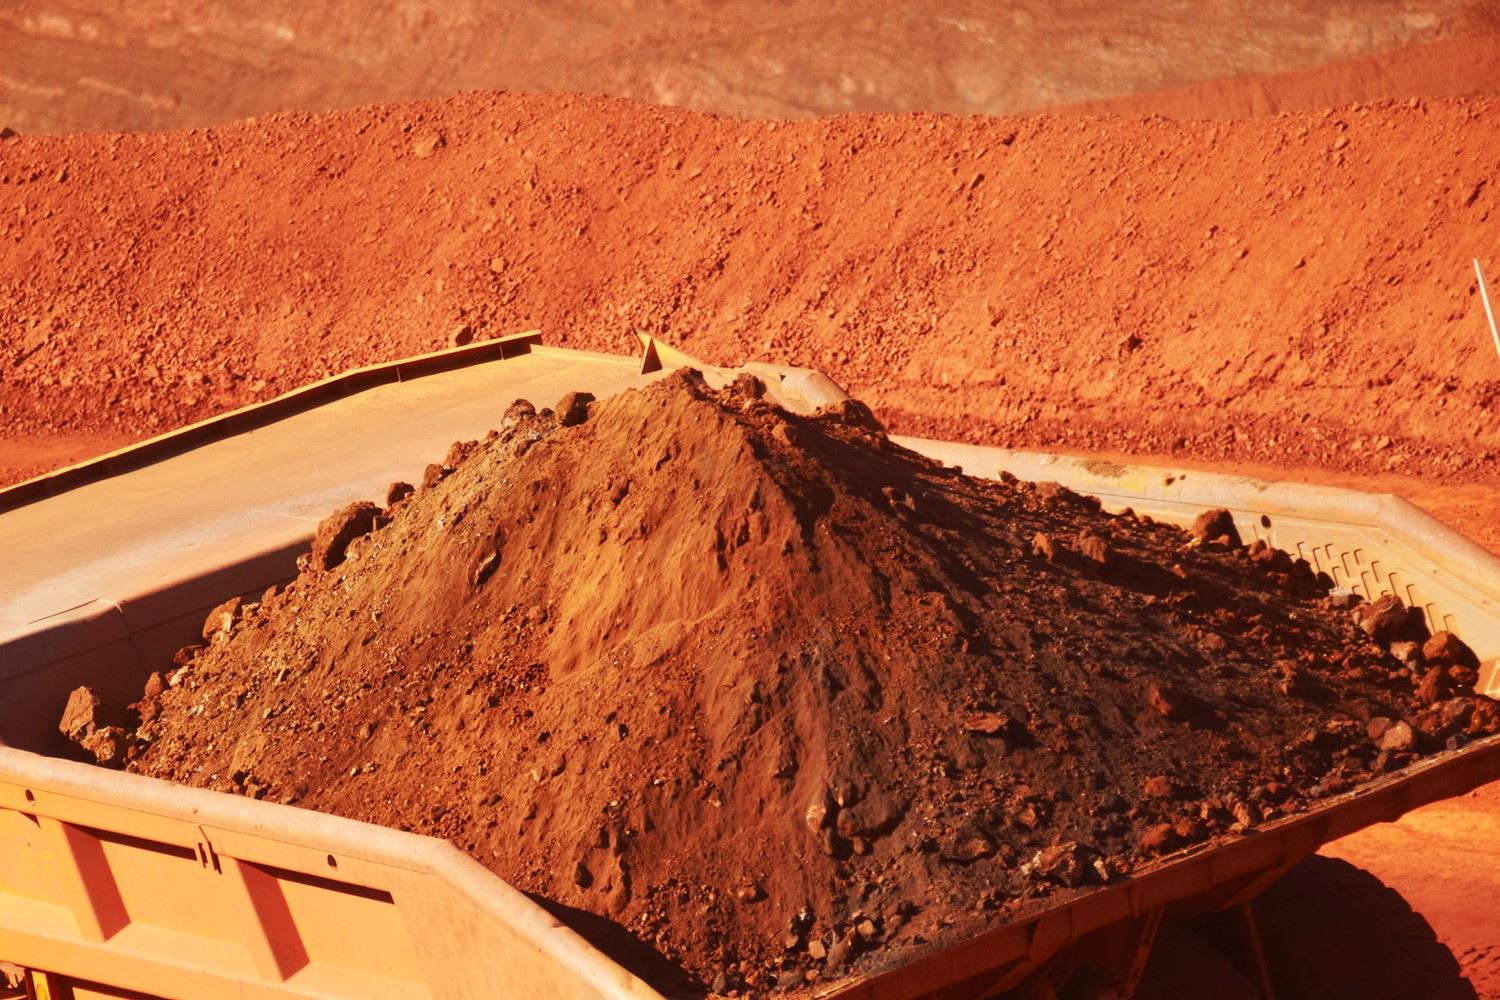 Iron ore experienced its highest weekly increase in six months